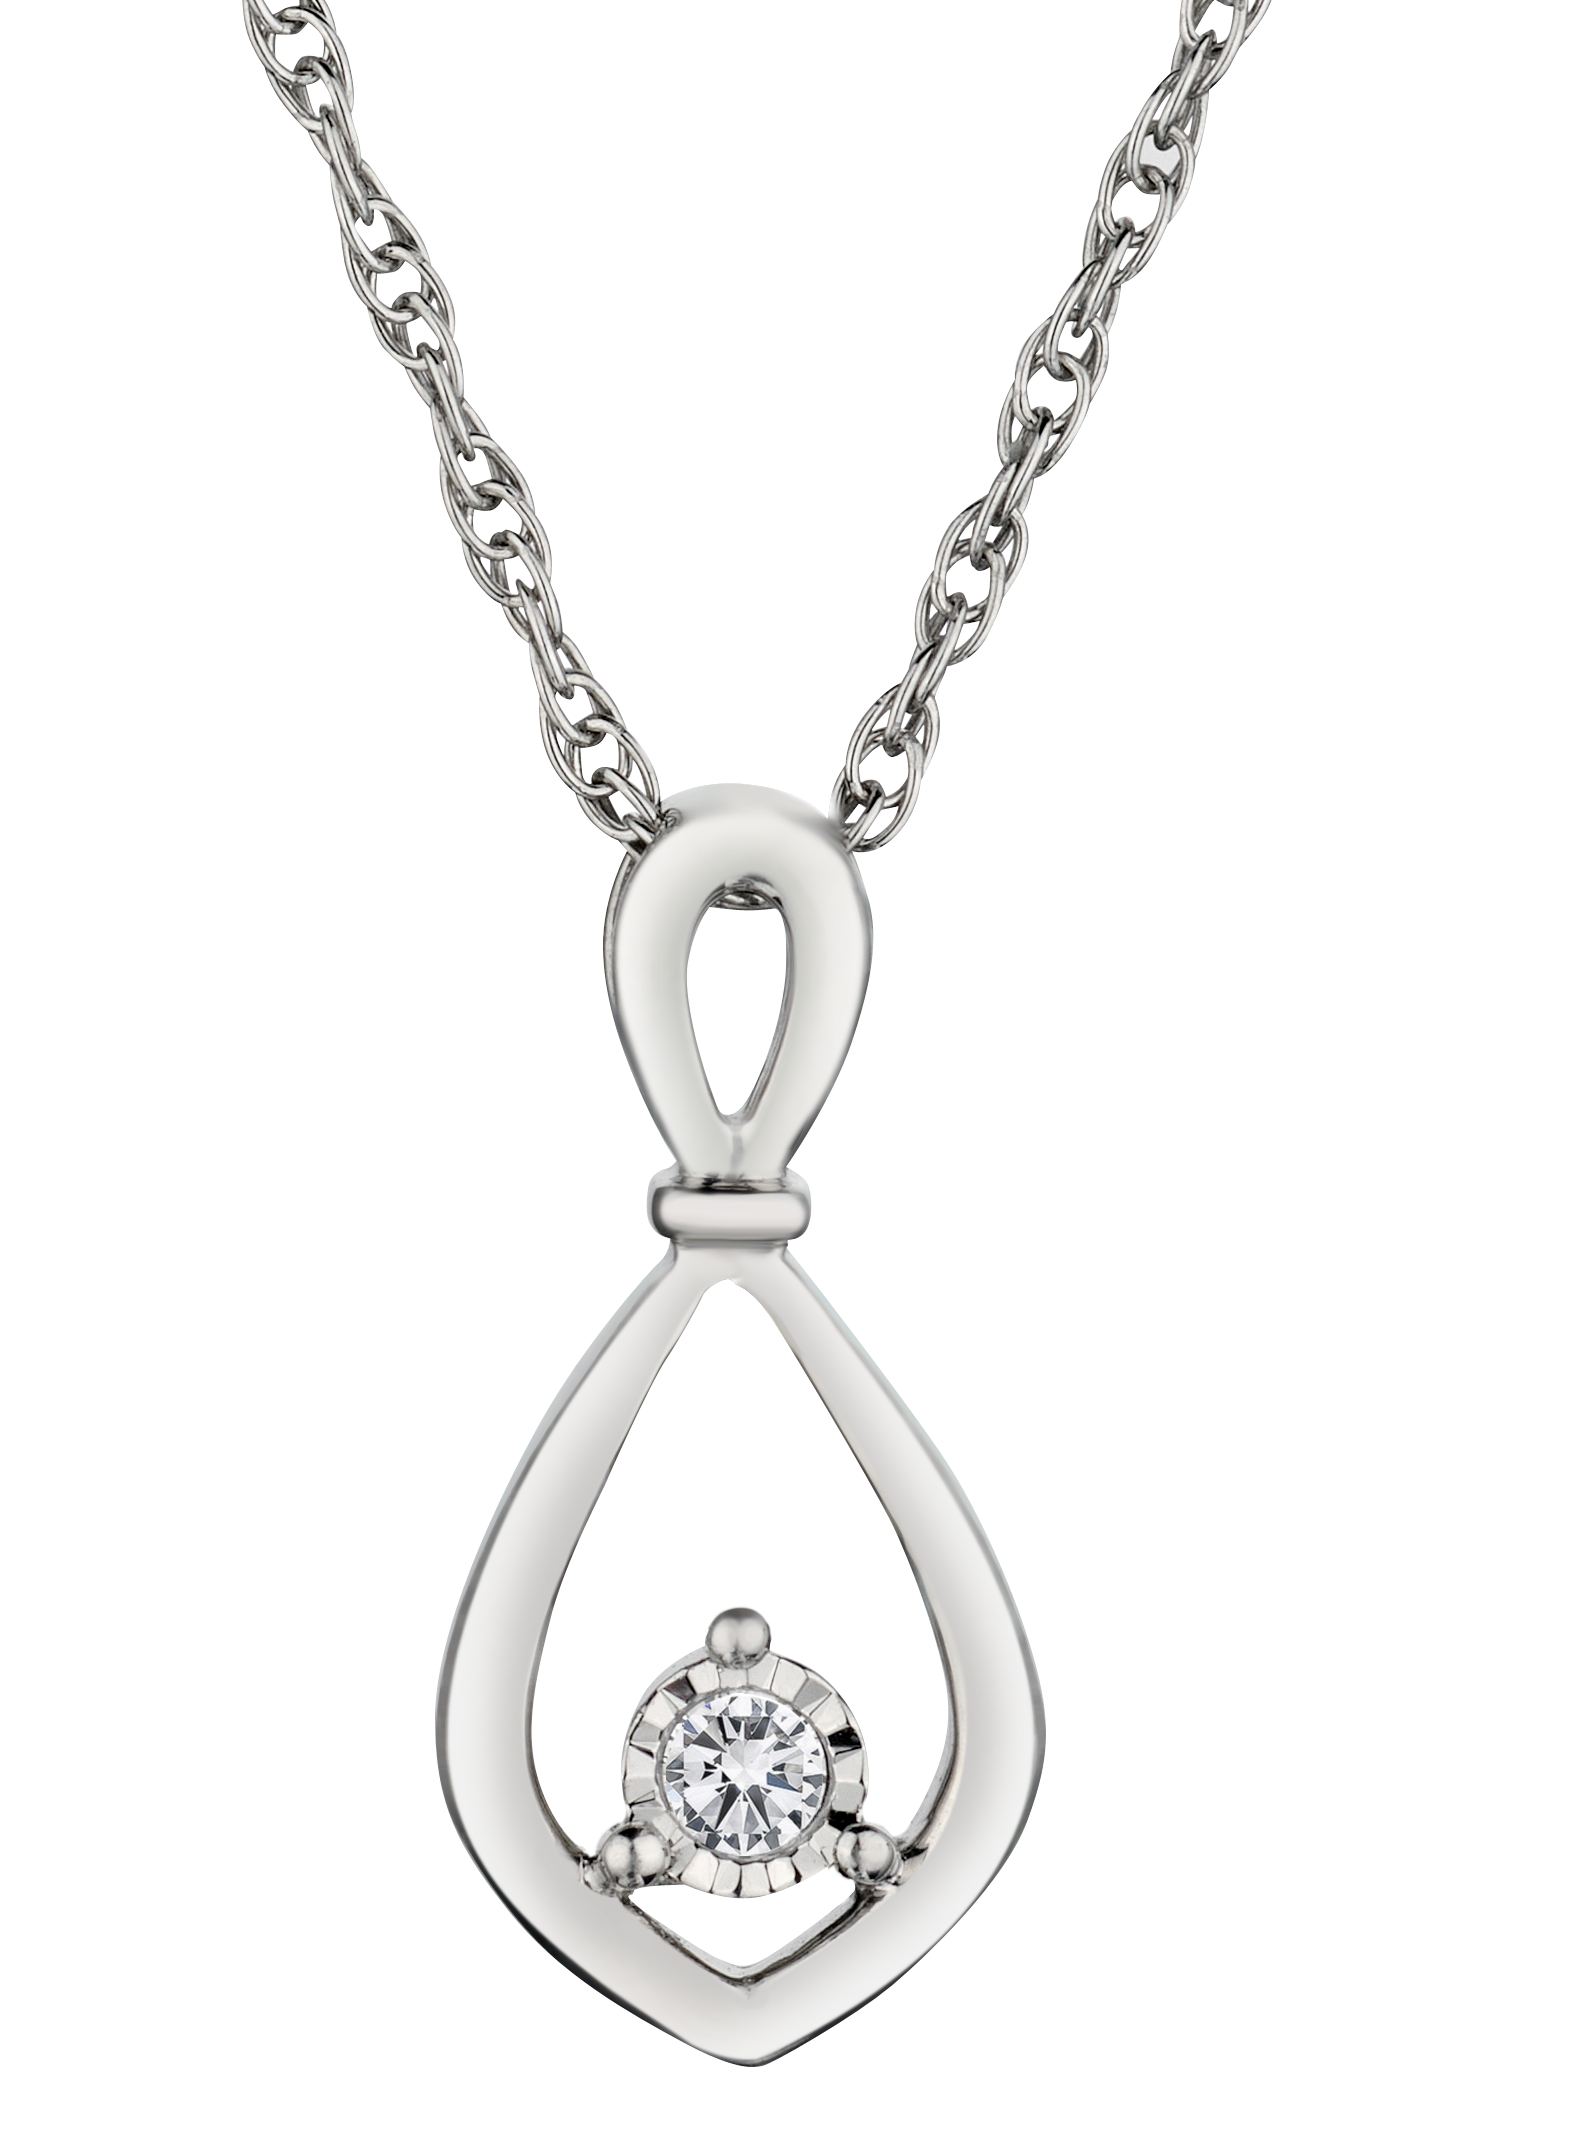 .04 Carat of Lab Grown Diamond "Miracle" Pendant, Silver.....................NOW